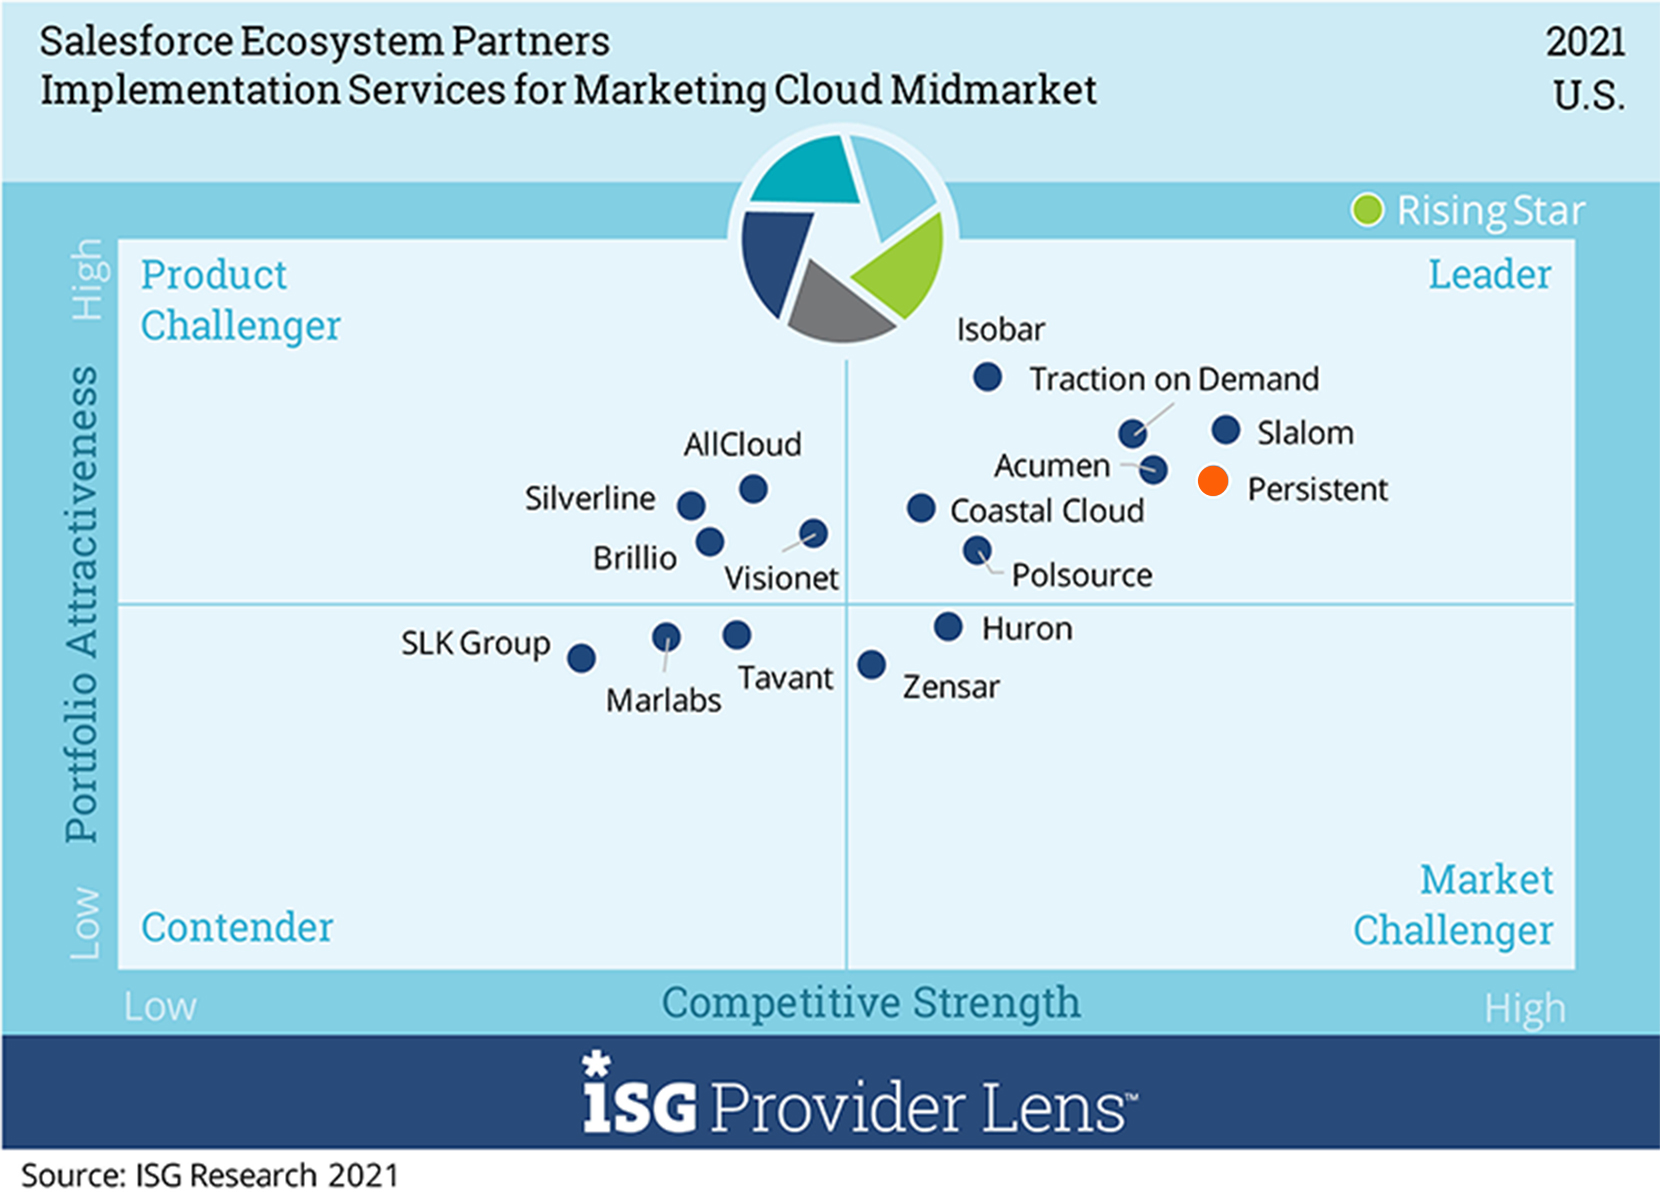 ‘Leader’ in Implementation Services for Marketing Cloud – Midmarket in U.S. and Germany